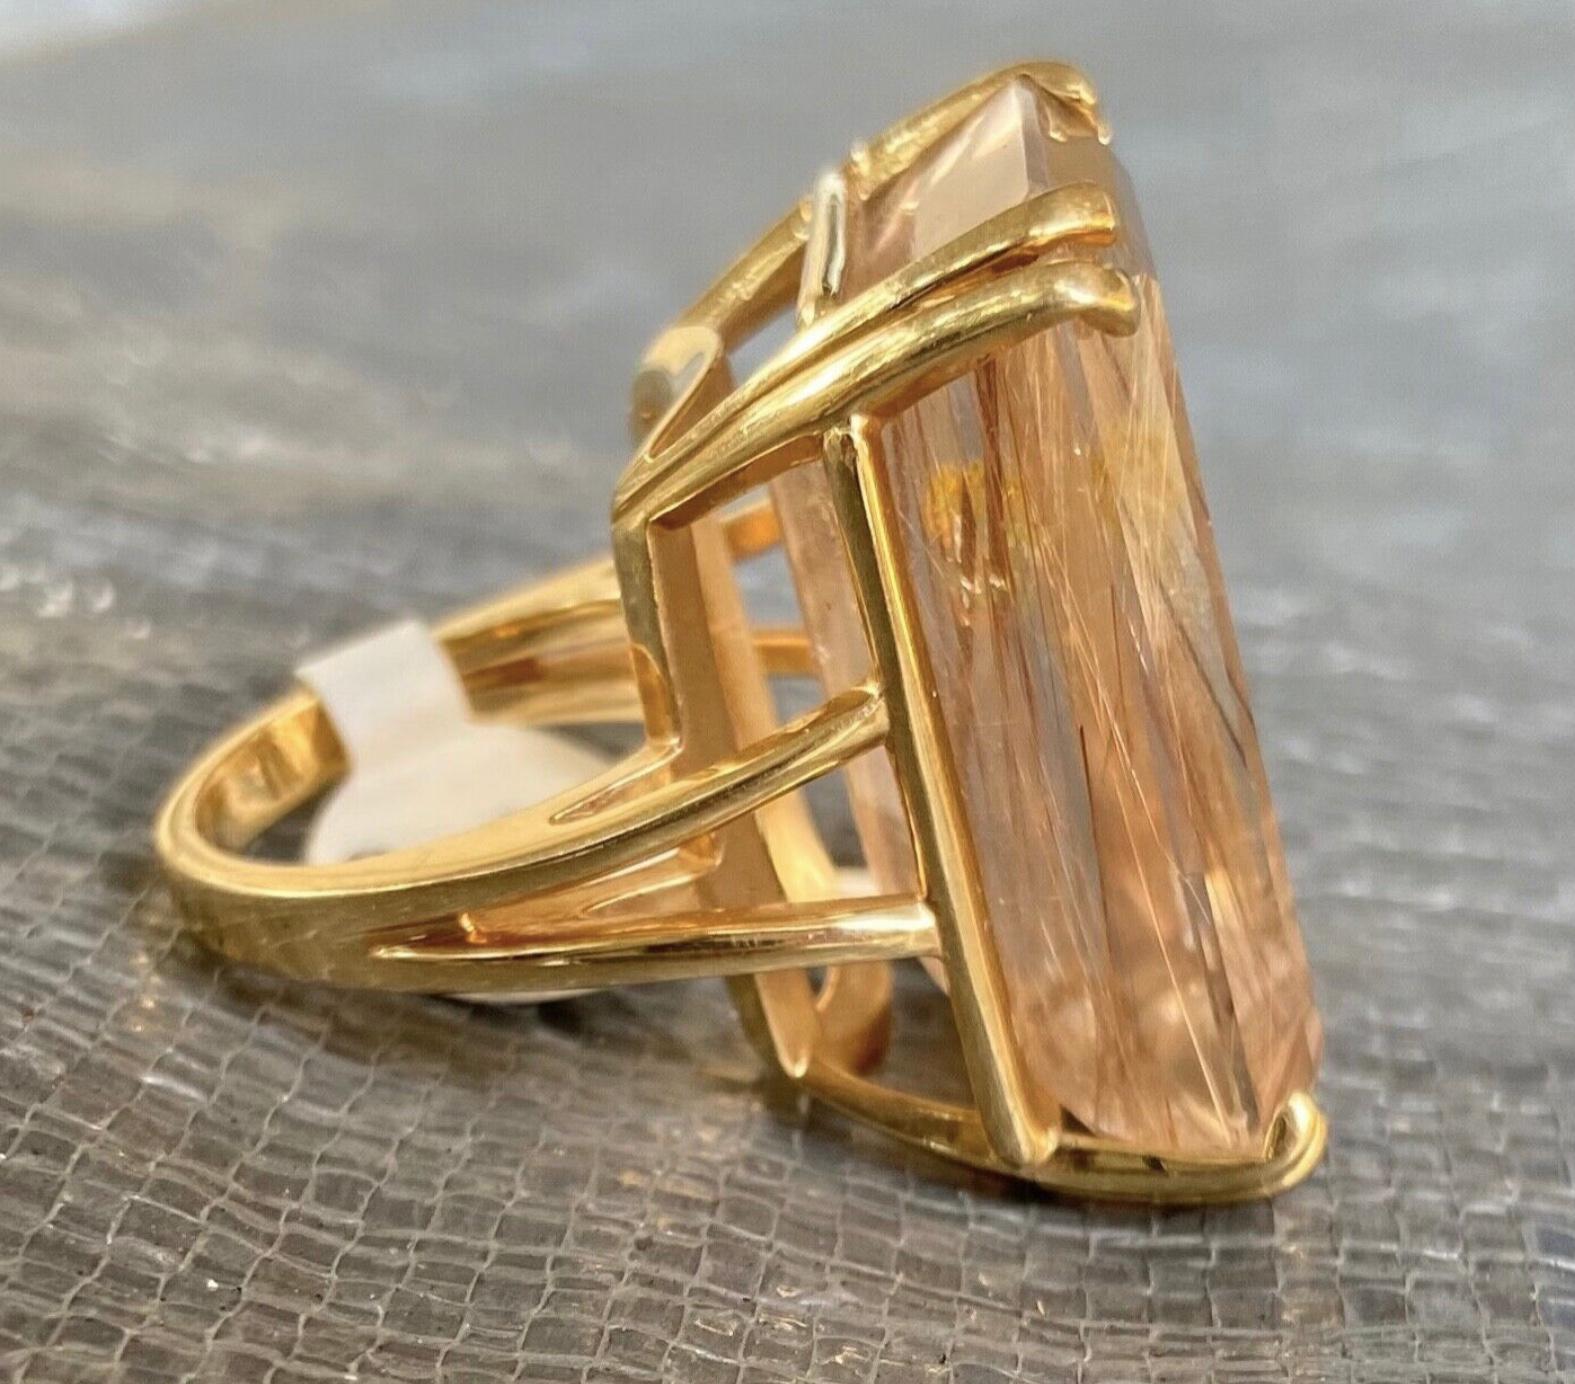 Large 14K Yellow Gold Reticulated Quartz Cocktail Ring In Good Condition For Sale In Bradenton, FL